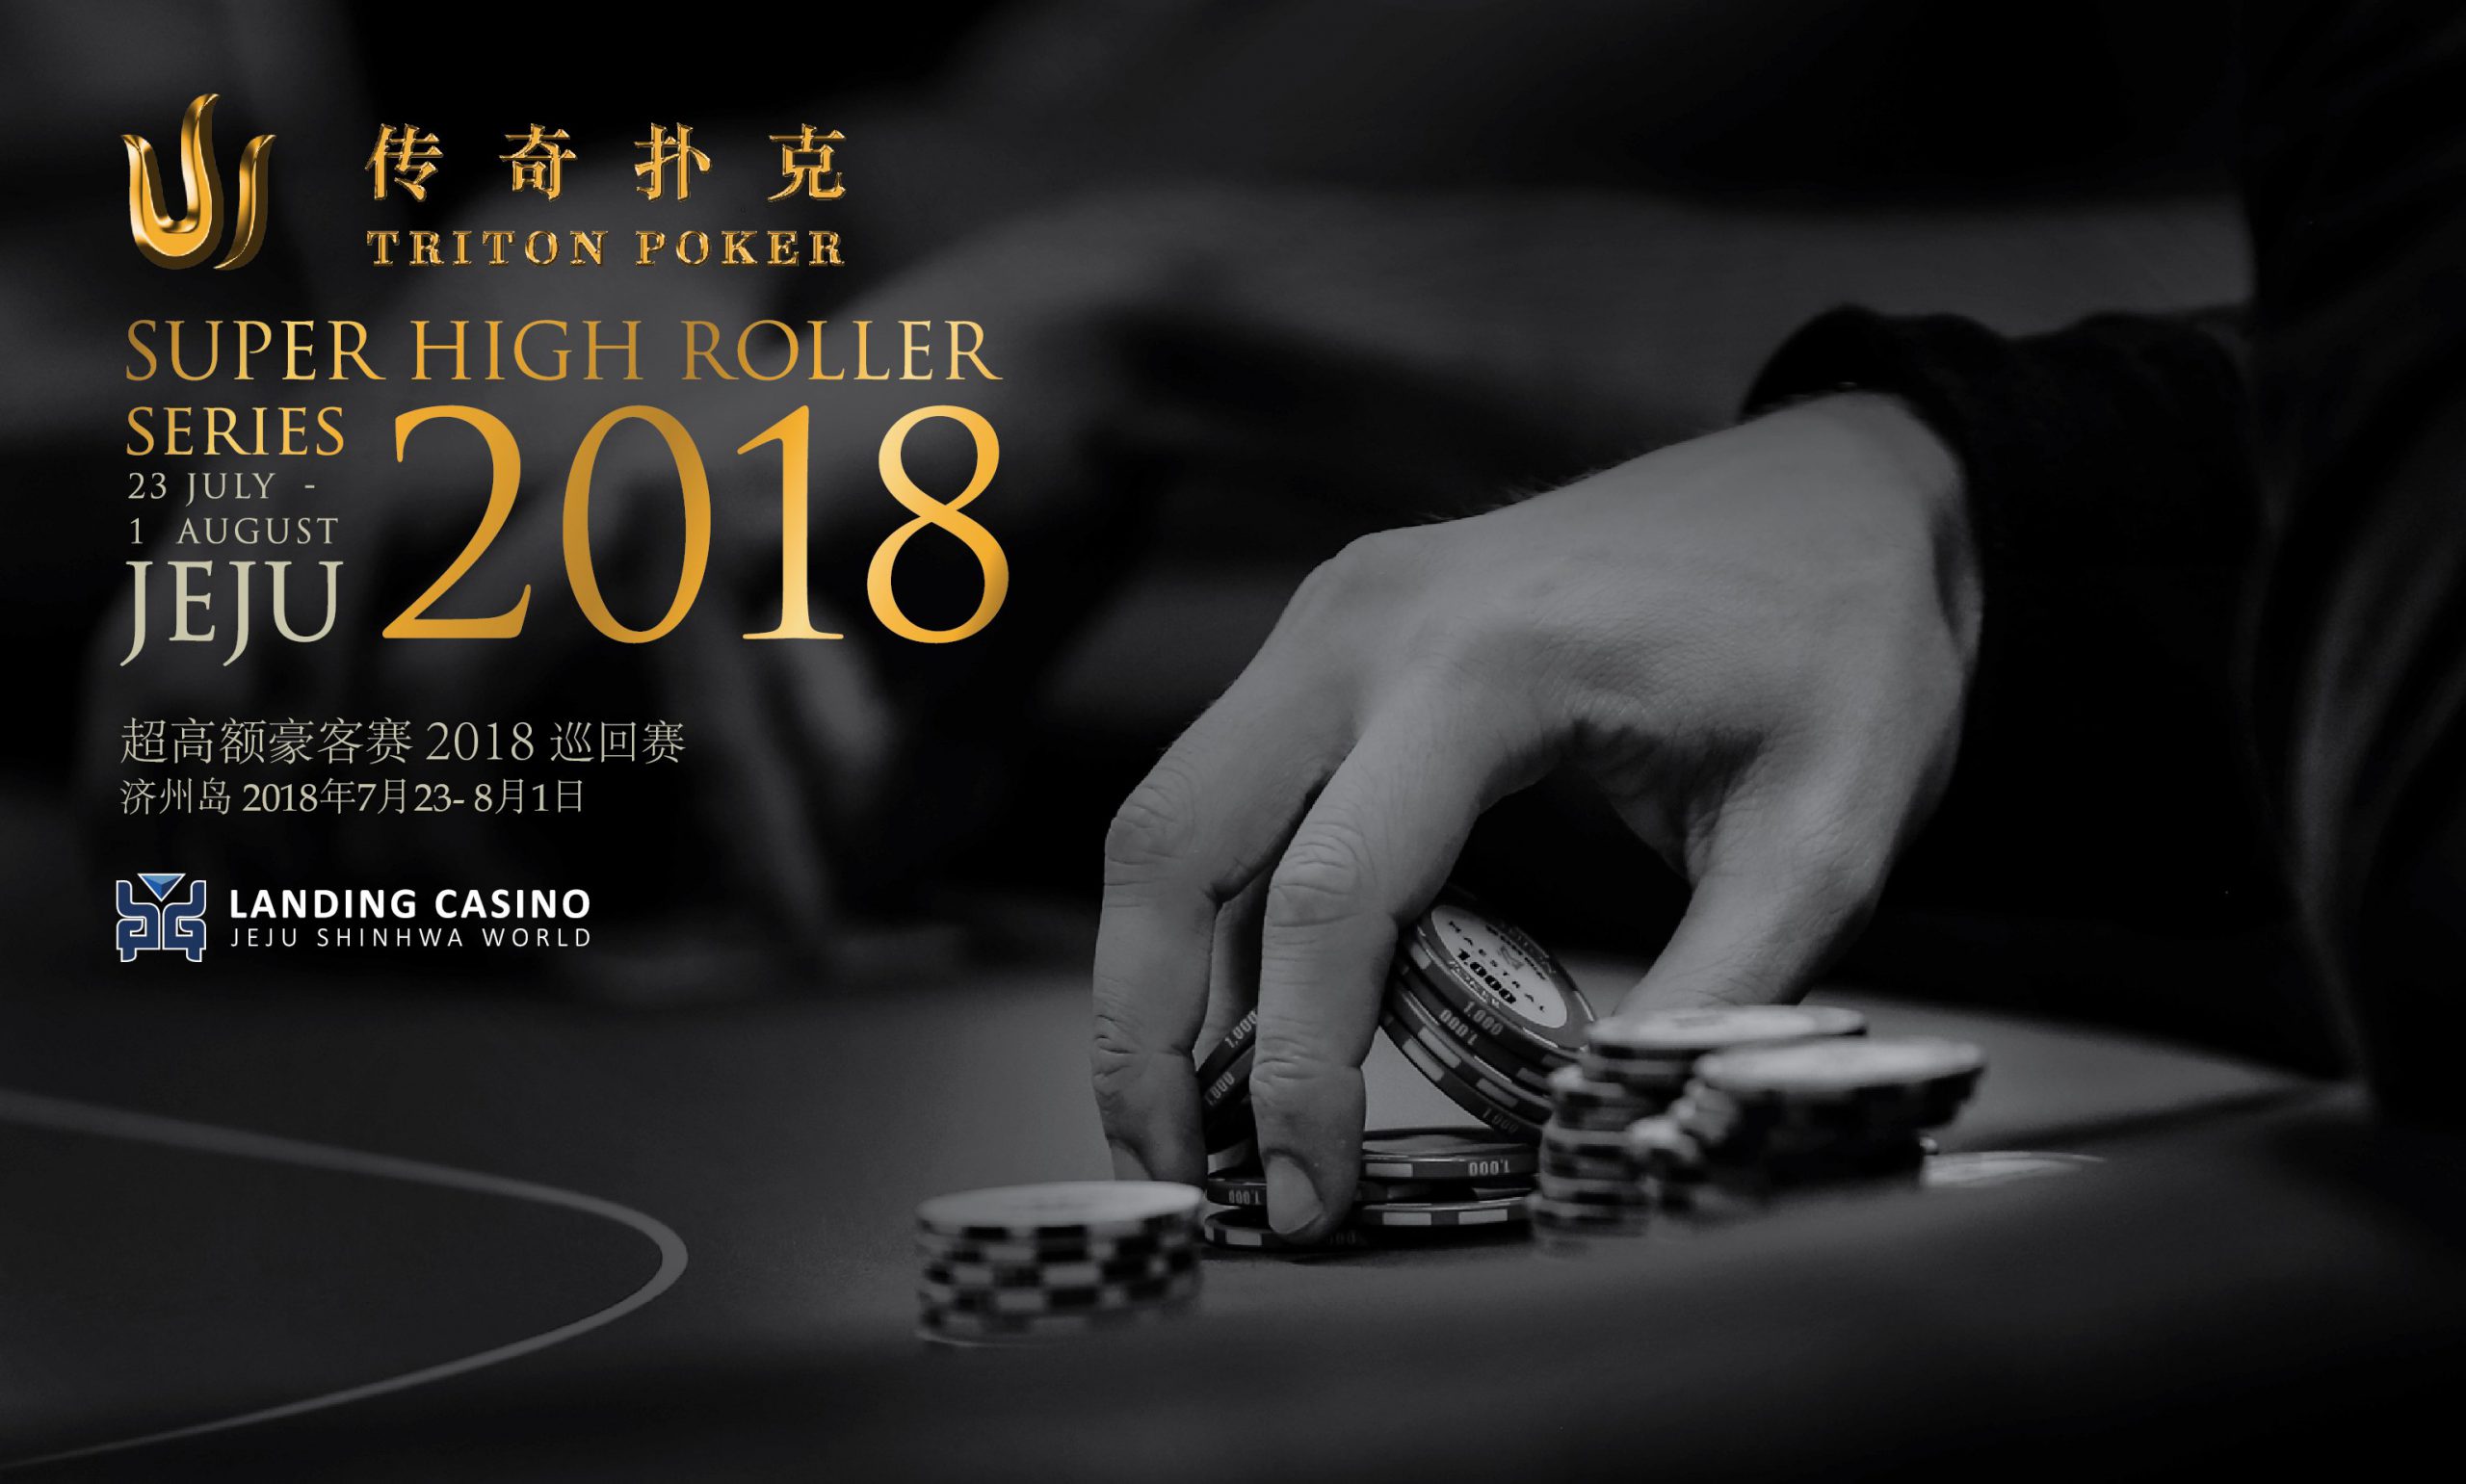 cure Treble beautiful Triton Poker - Jeju Welcomes High Stakes Short-Deck, Ante Only Poker -  Triton Poker